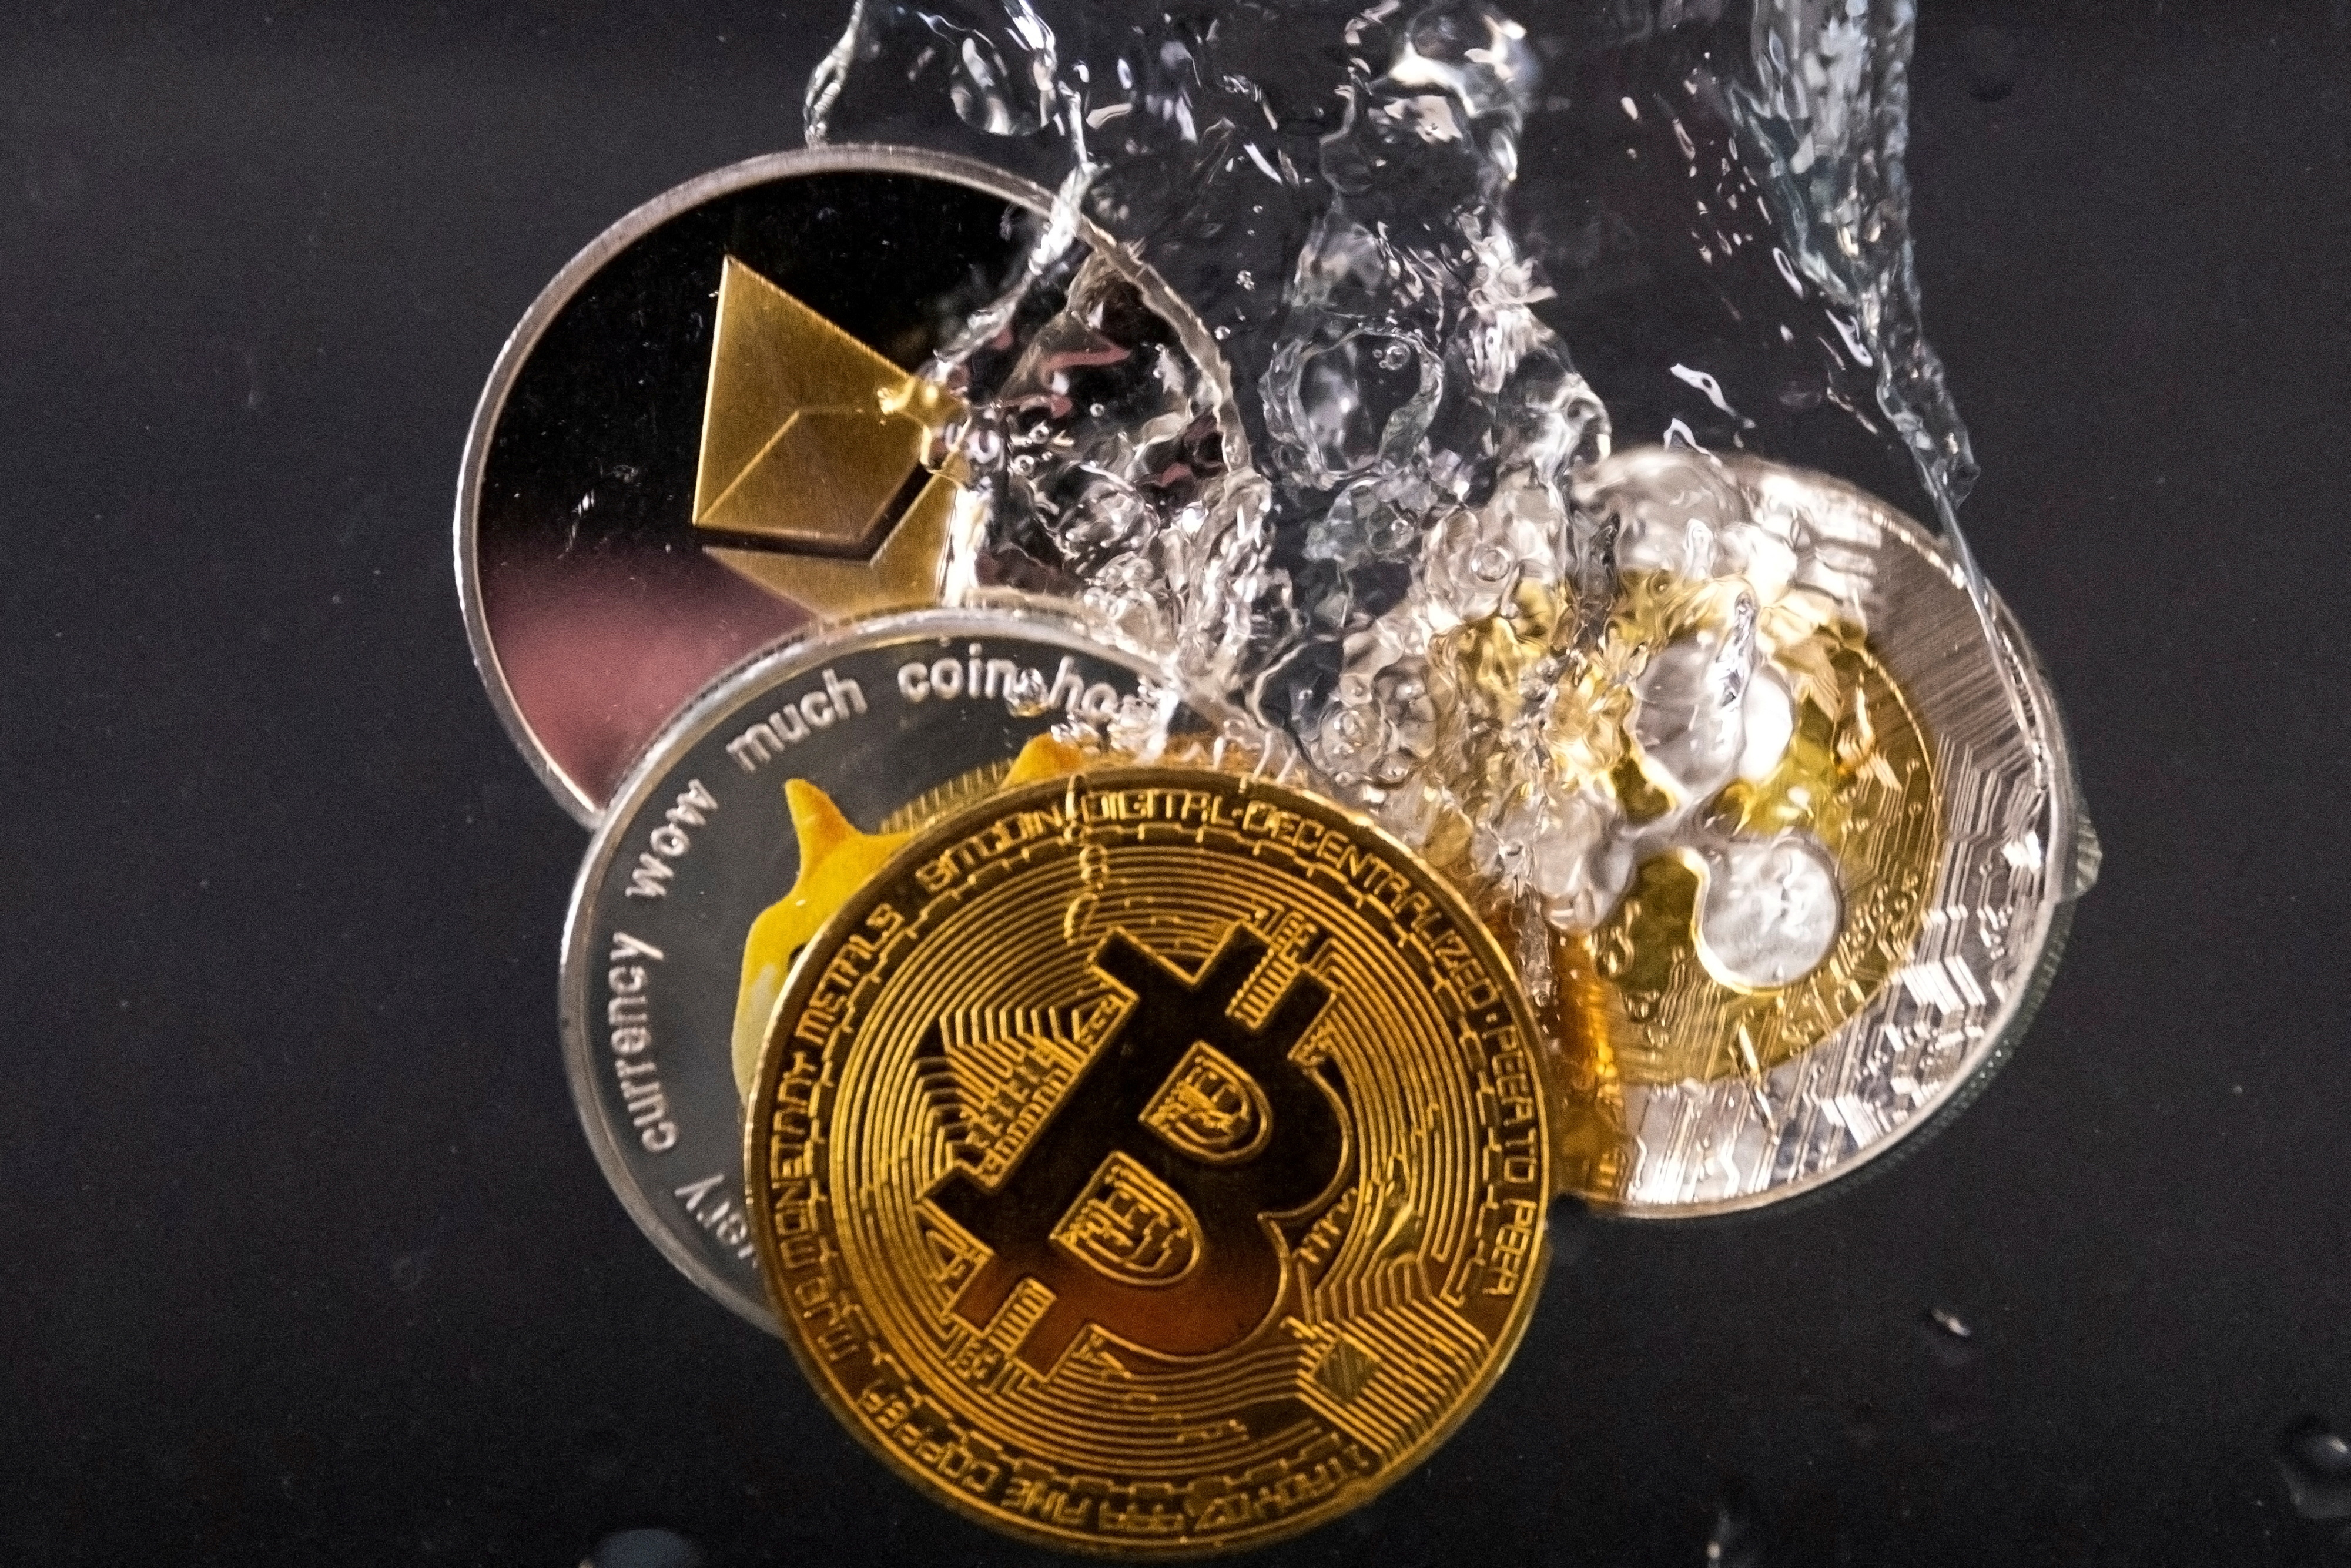 Commemorative tokens representing Bitcoin, Ethereum, Dogecoin and Ripple cryptocurrency networks are immersed in water